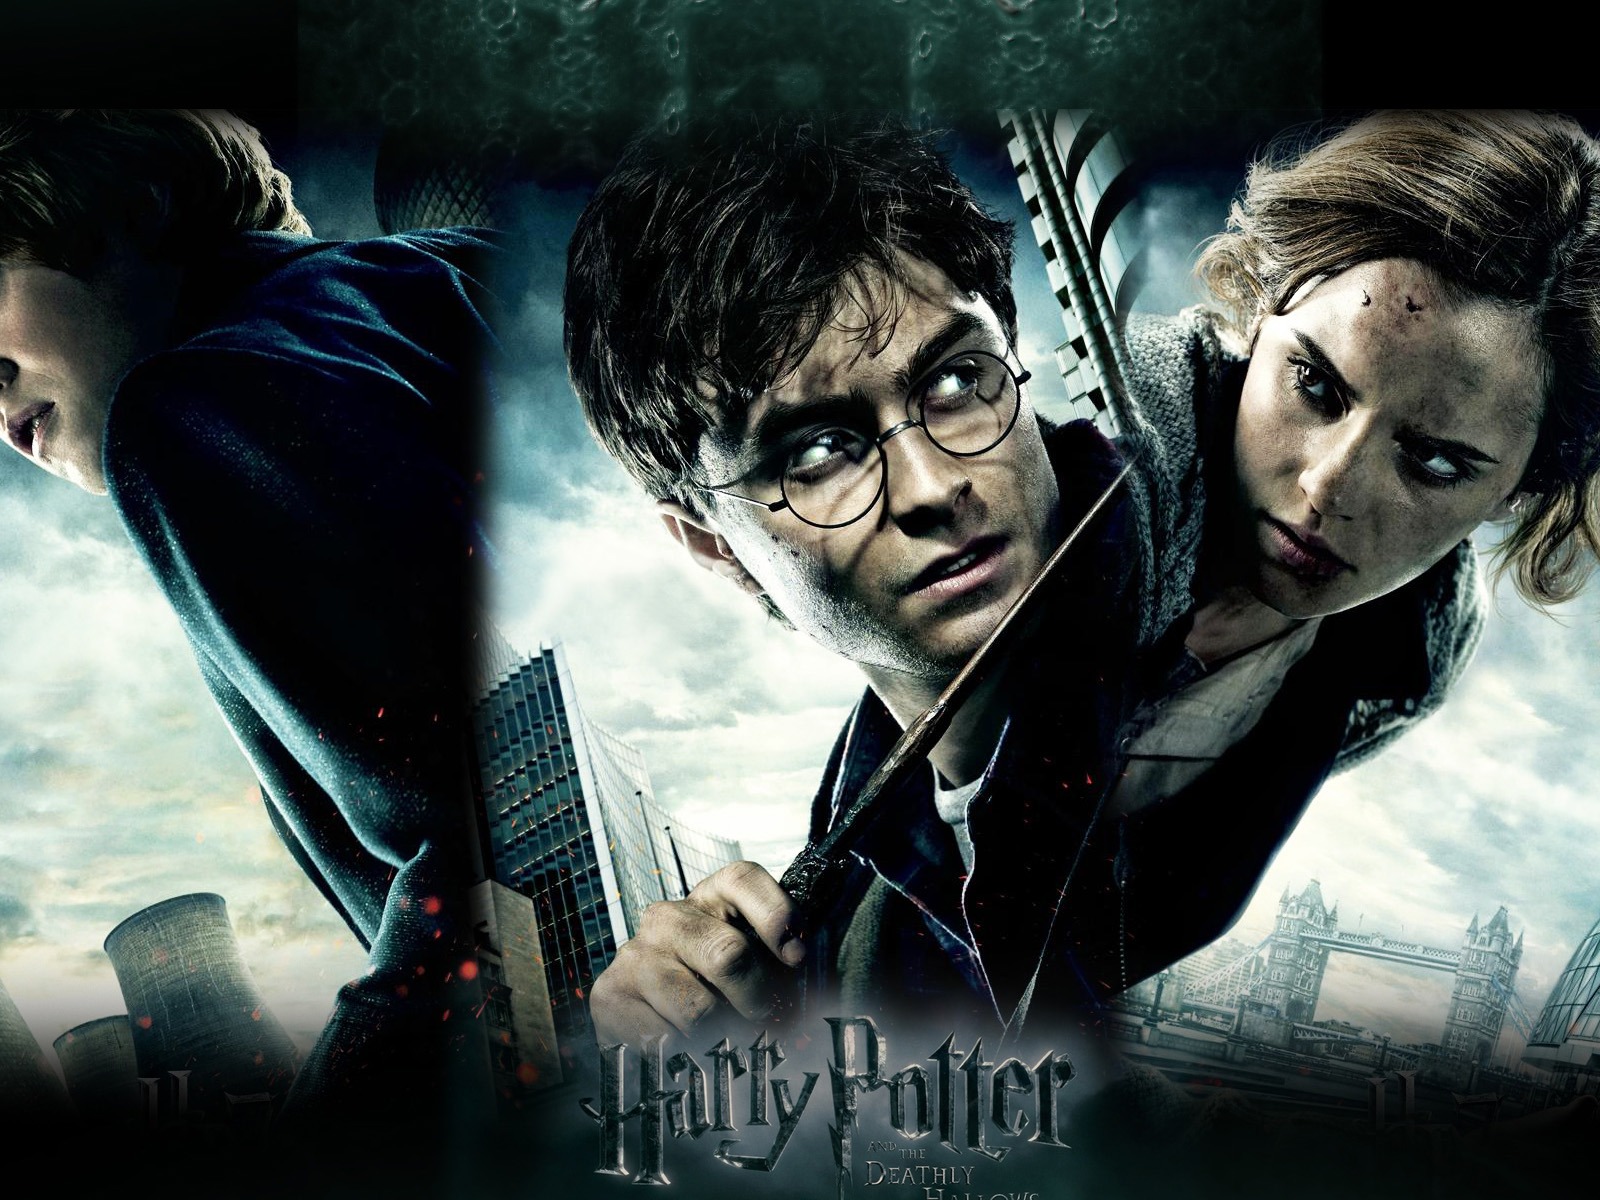 Harry Potter and the Deathly Hallows 哈利·波特与死亡圣器 高清壁纸31 - 1600x1200